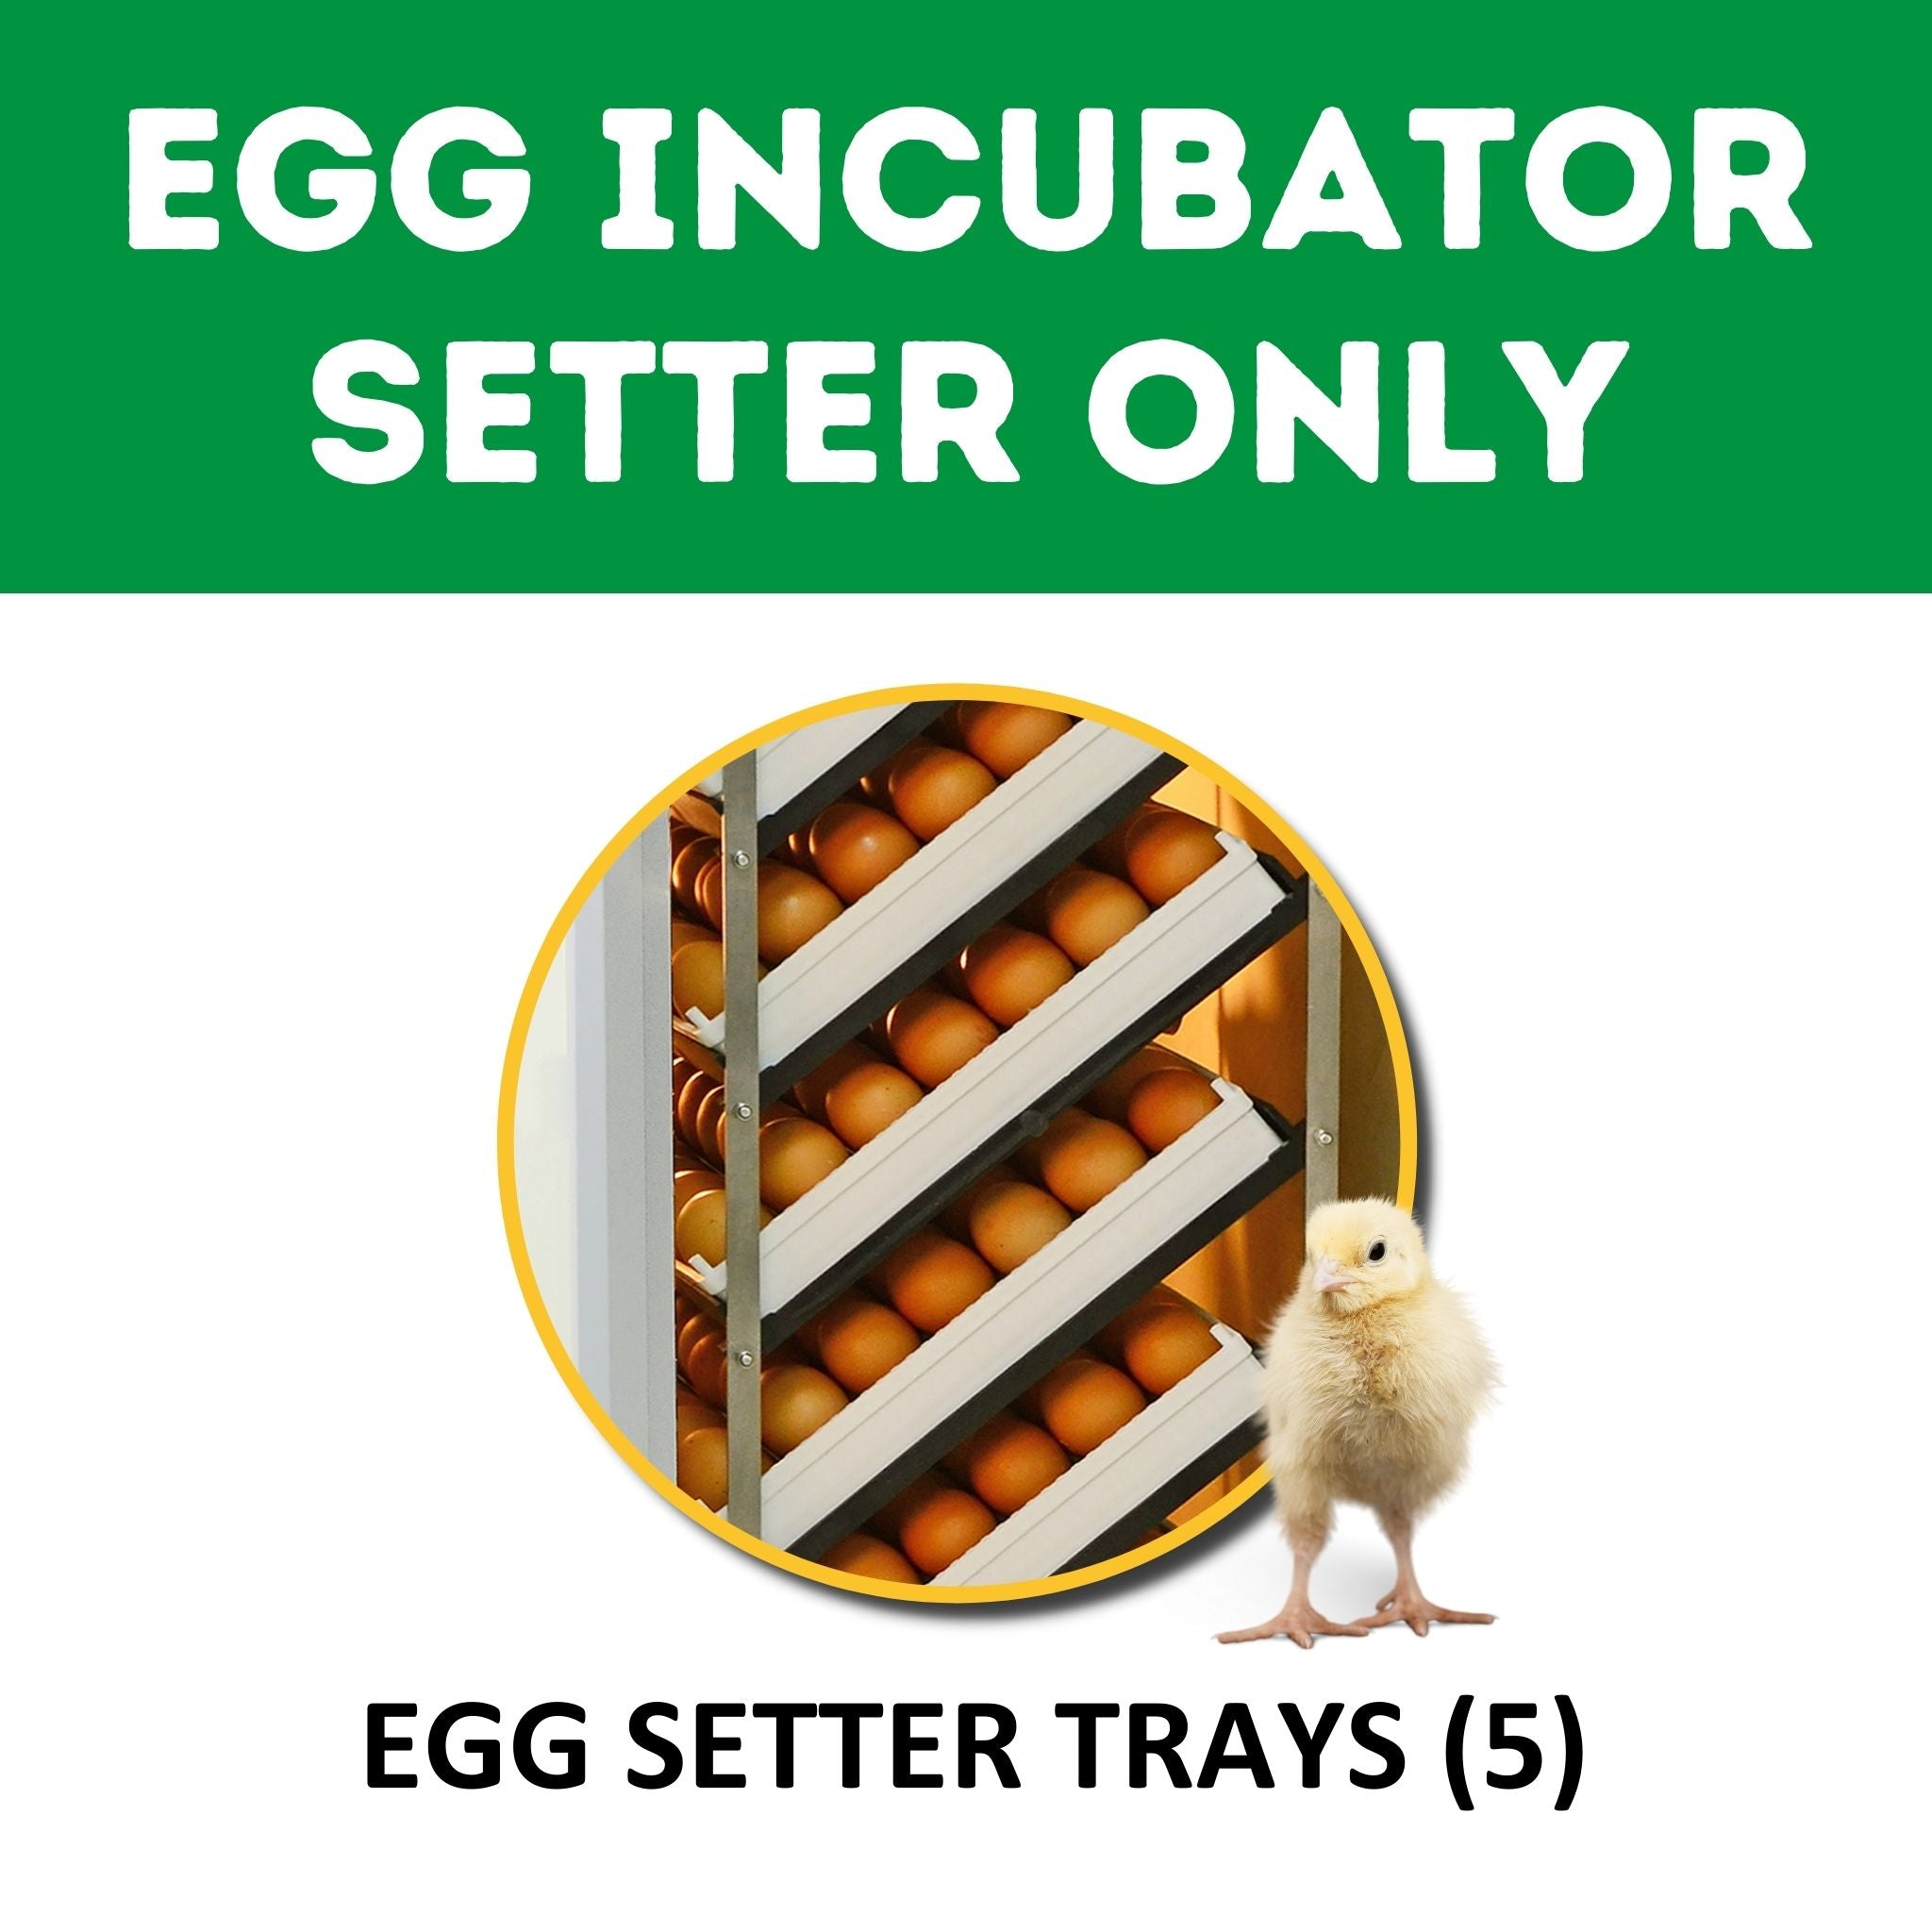 Hatching Time Cimuka. Image shows this incubator is a setter only and includes 5 egg setter trays. There is a chick in the image.